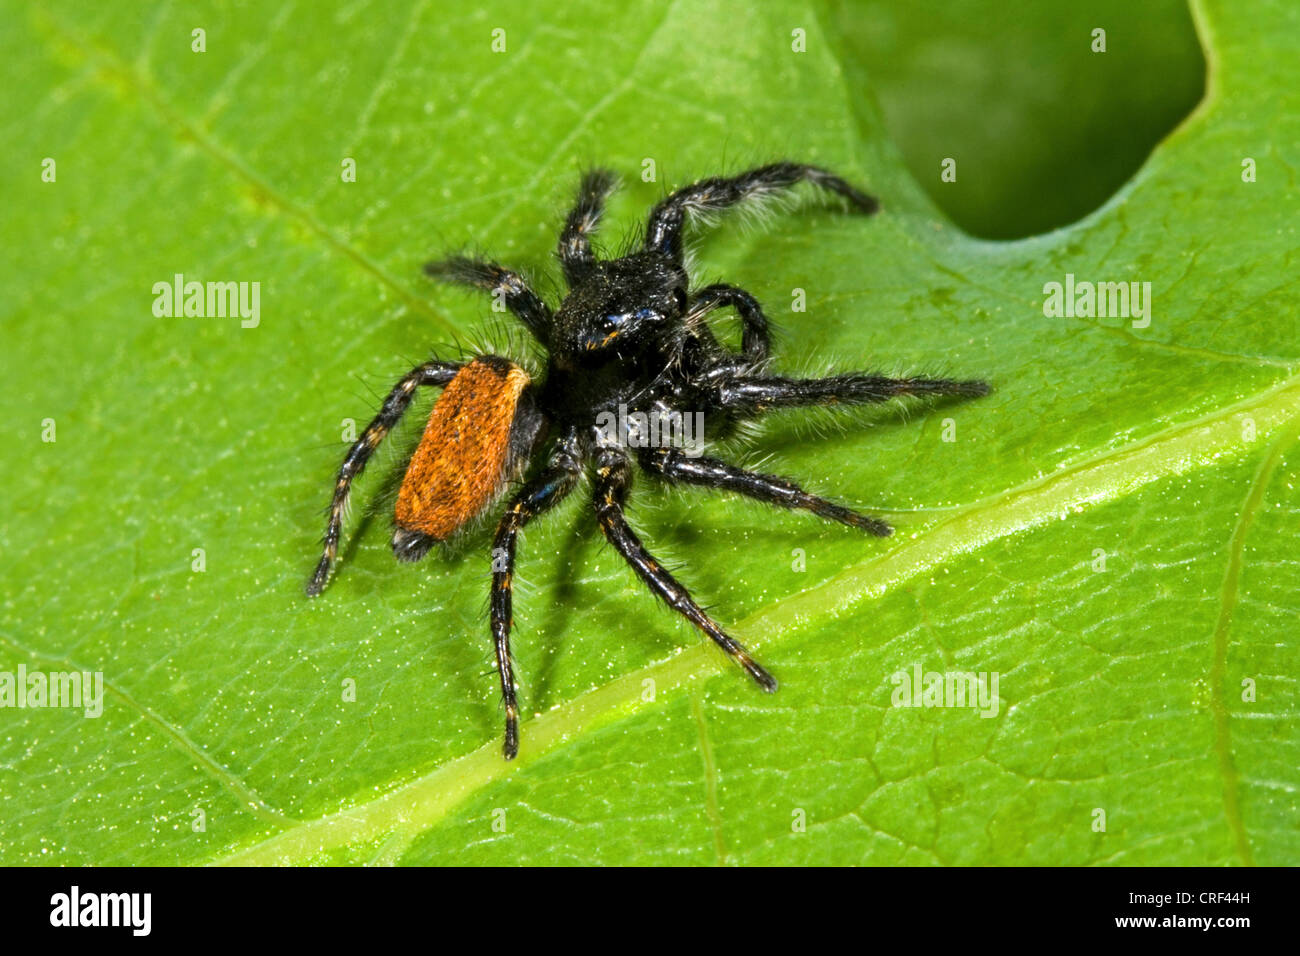 Jumping spider (Carrhotus xanthogramma, Carrhotus bicolor), siting on a ...